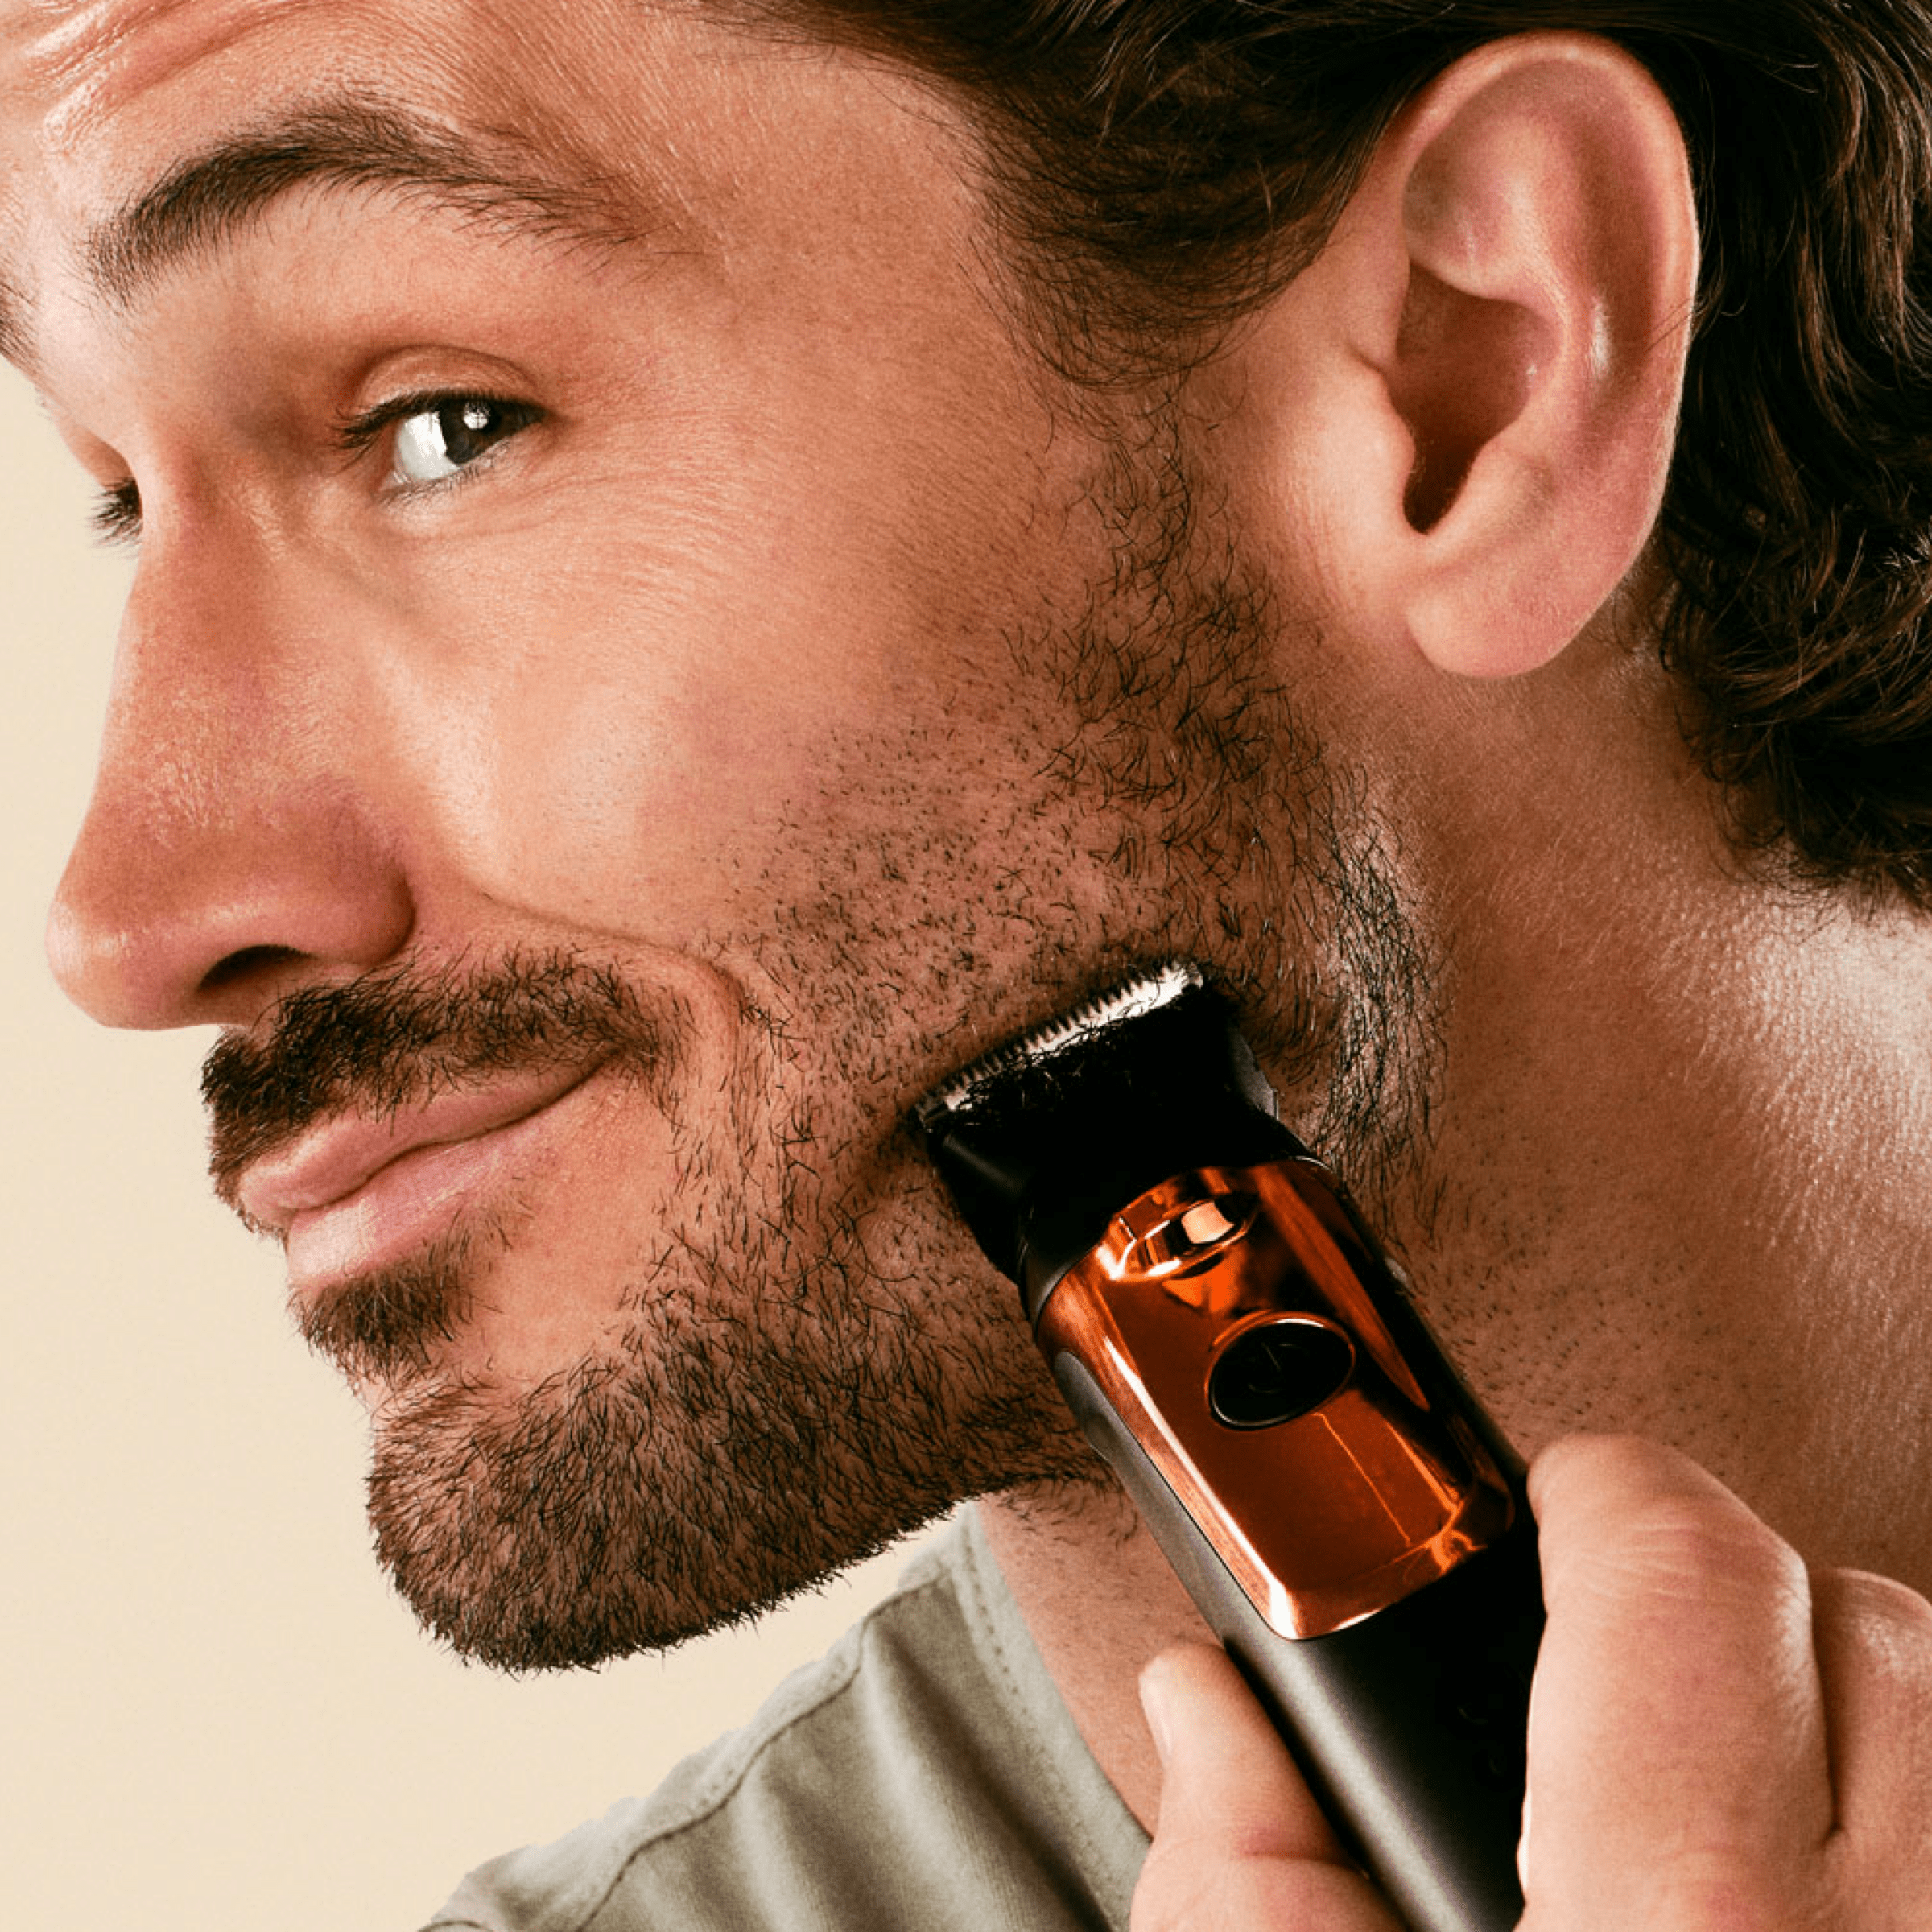 Dollar Shave Club Double Header Electric Trimmer product being used by man to shave blade.